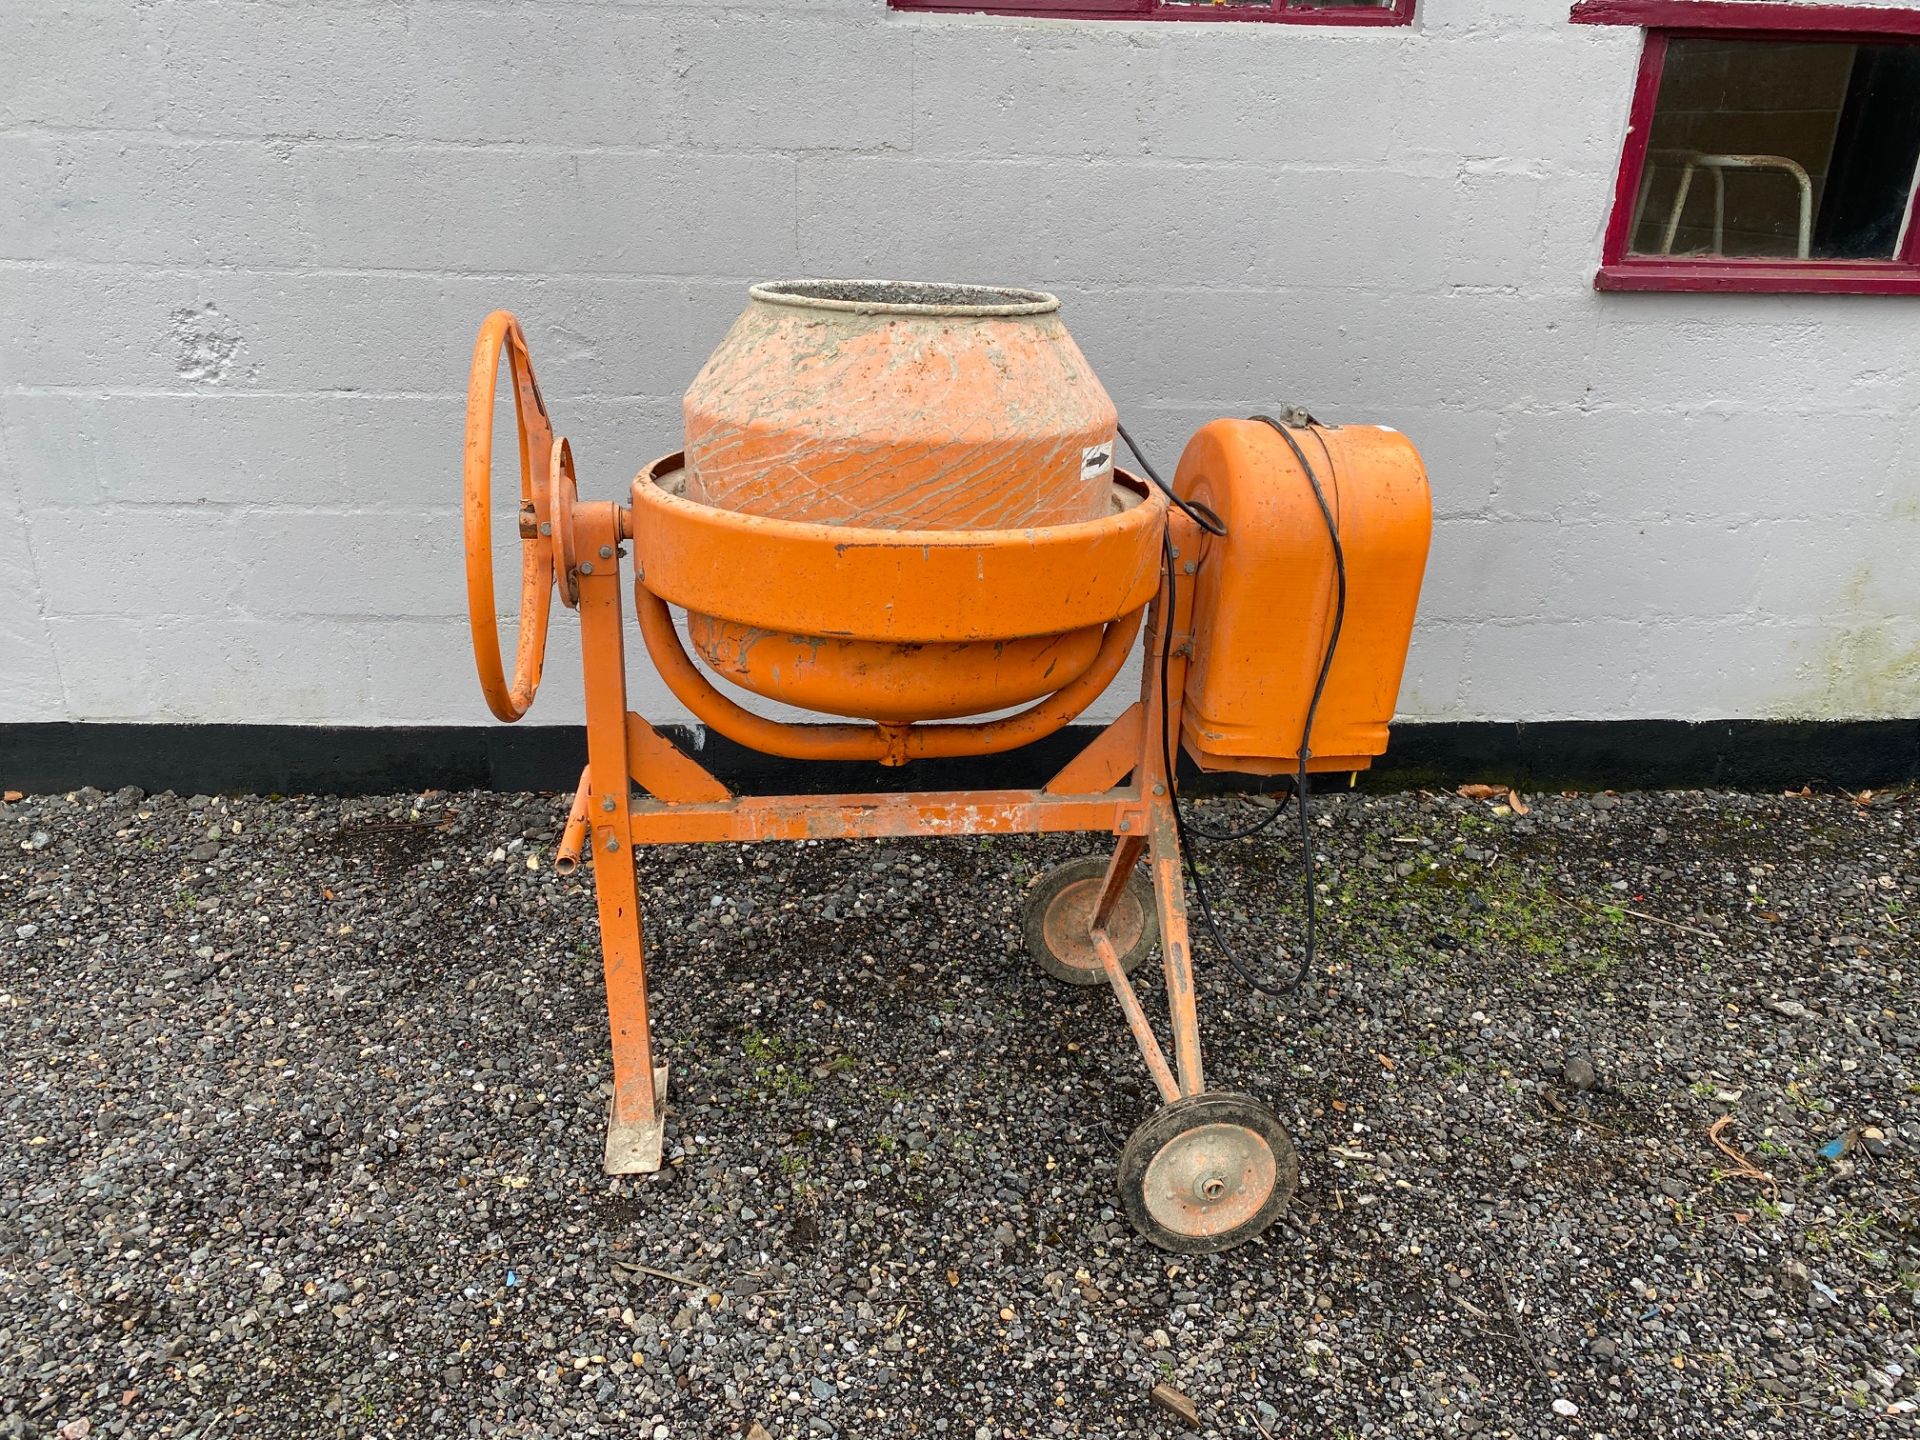 240V electric cement mixer.